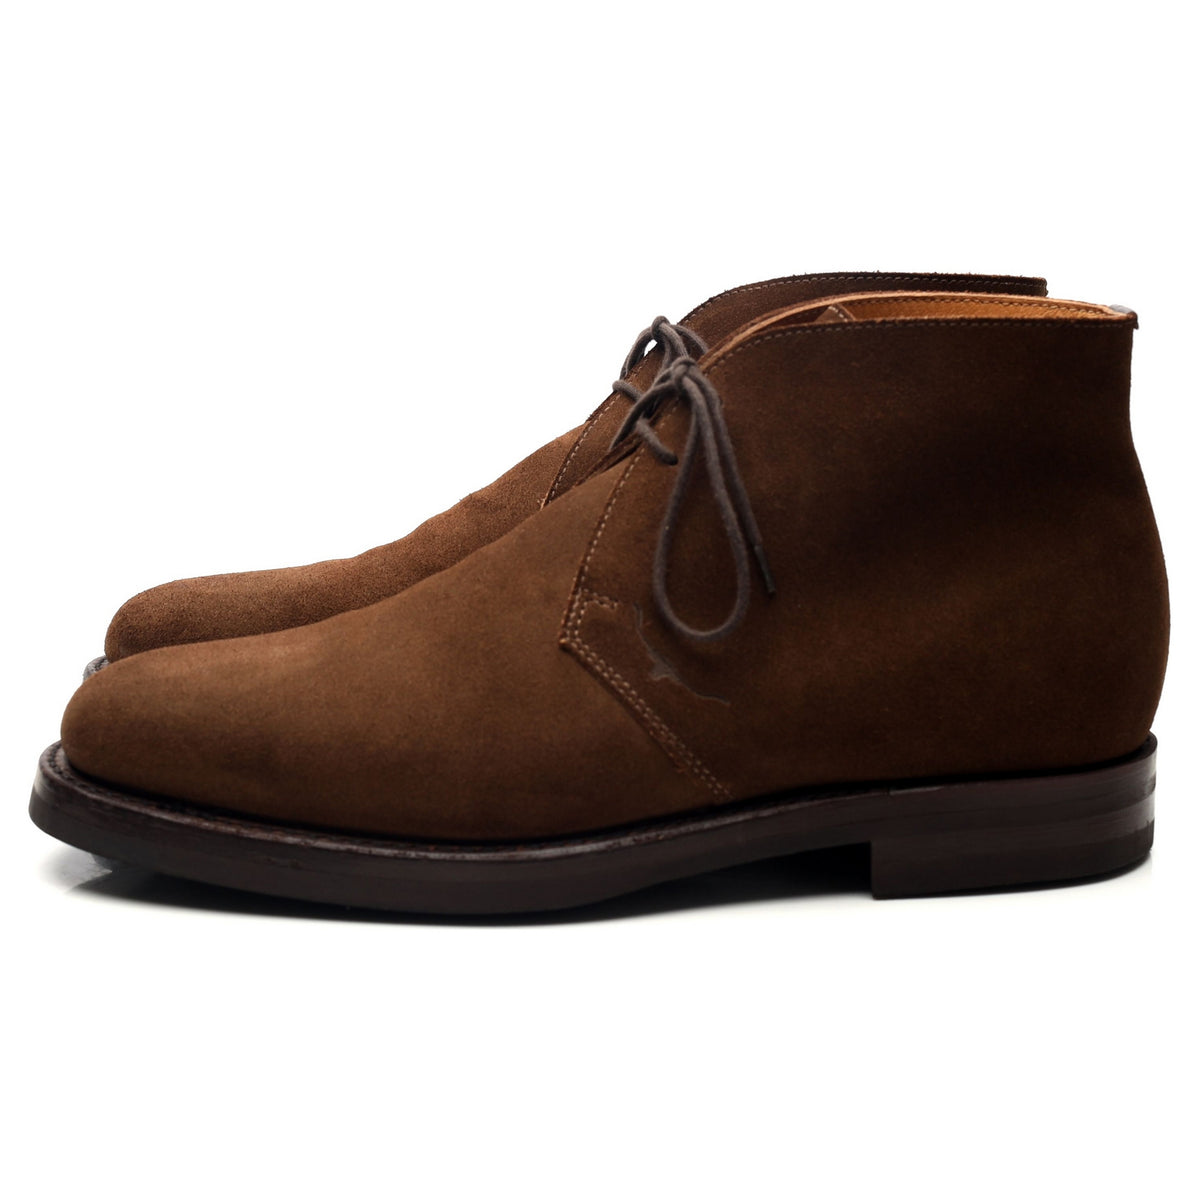 Brown Suede Chukka Boots UK 9